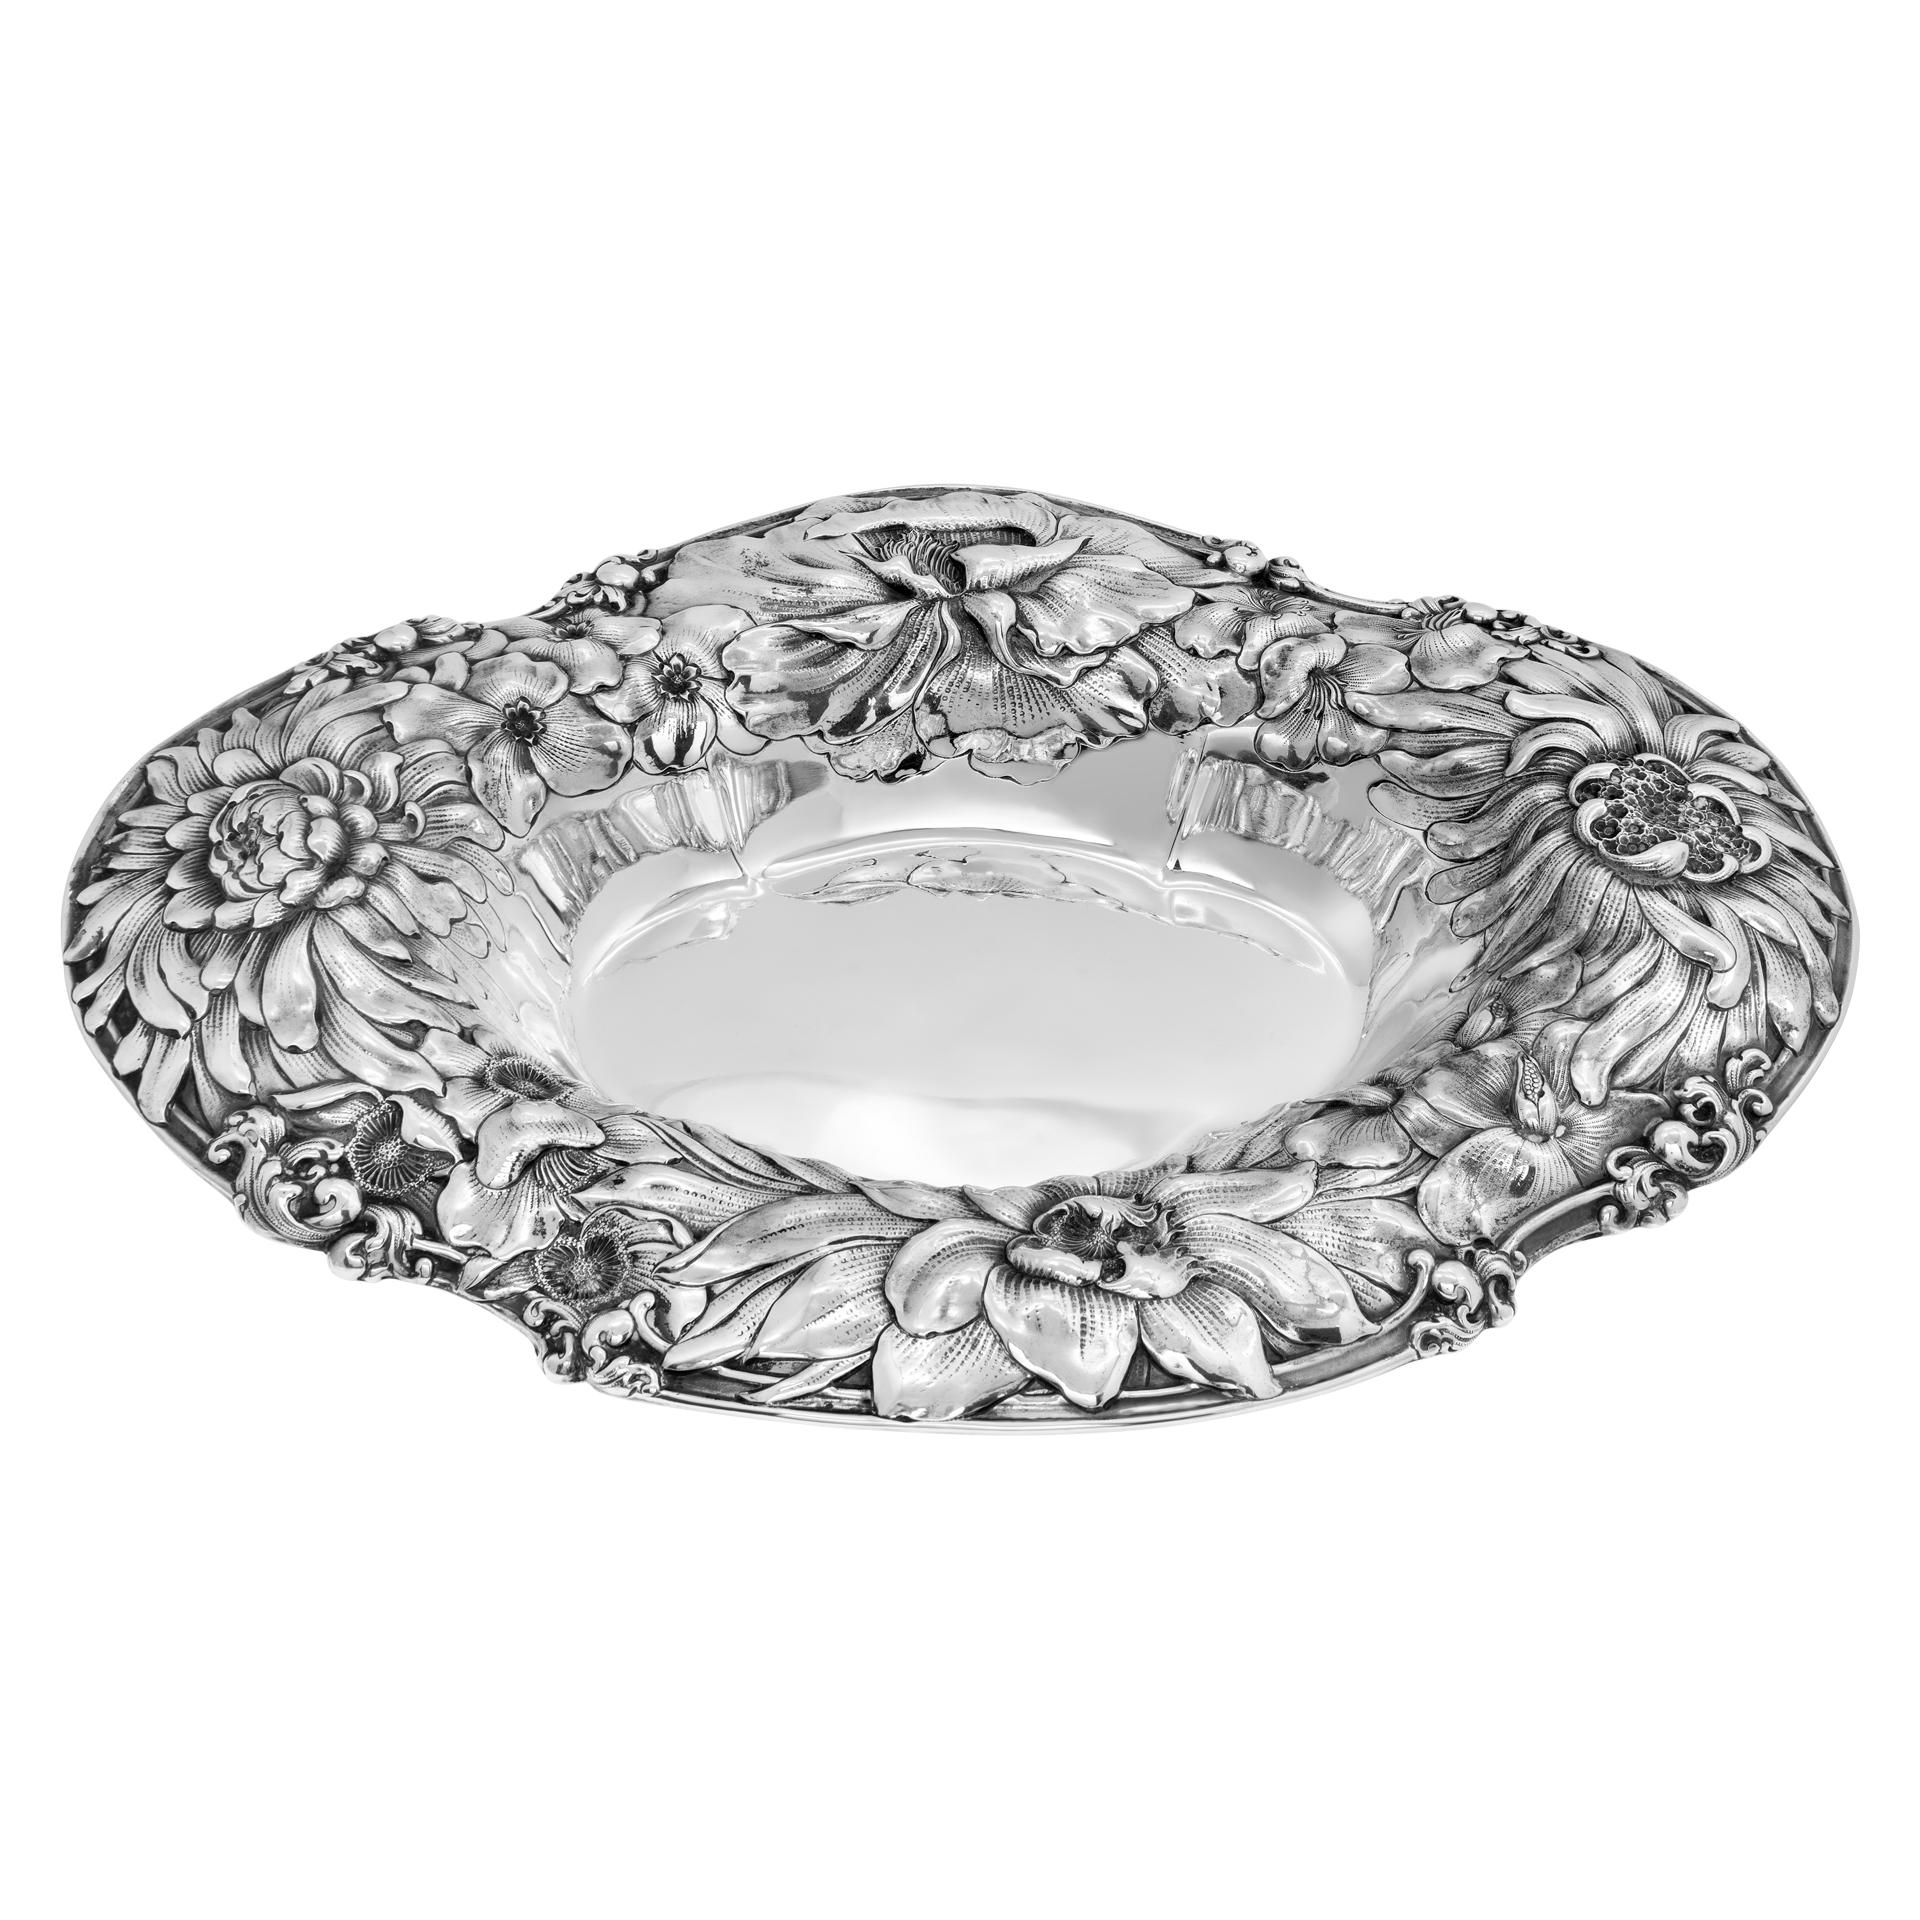 Imperial Chrysanthemum Sterling Silver Oval Bowl Centerpiece For Sale